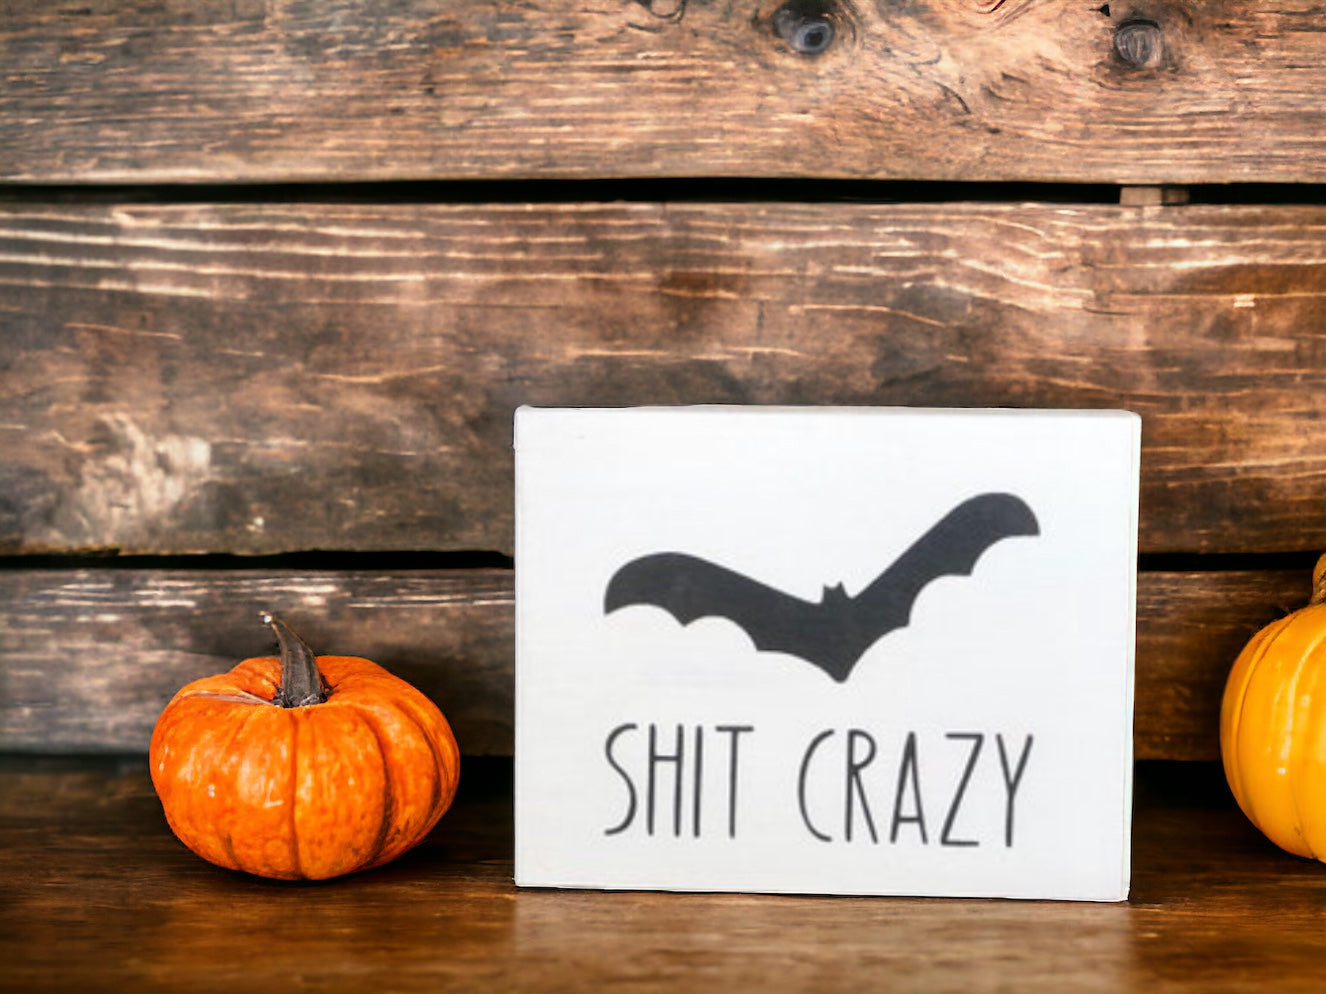 Bat Shit Crazy - Funny Rustic Wood White Sign